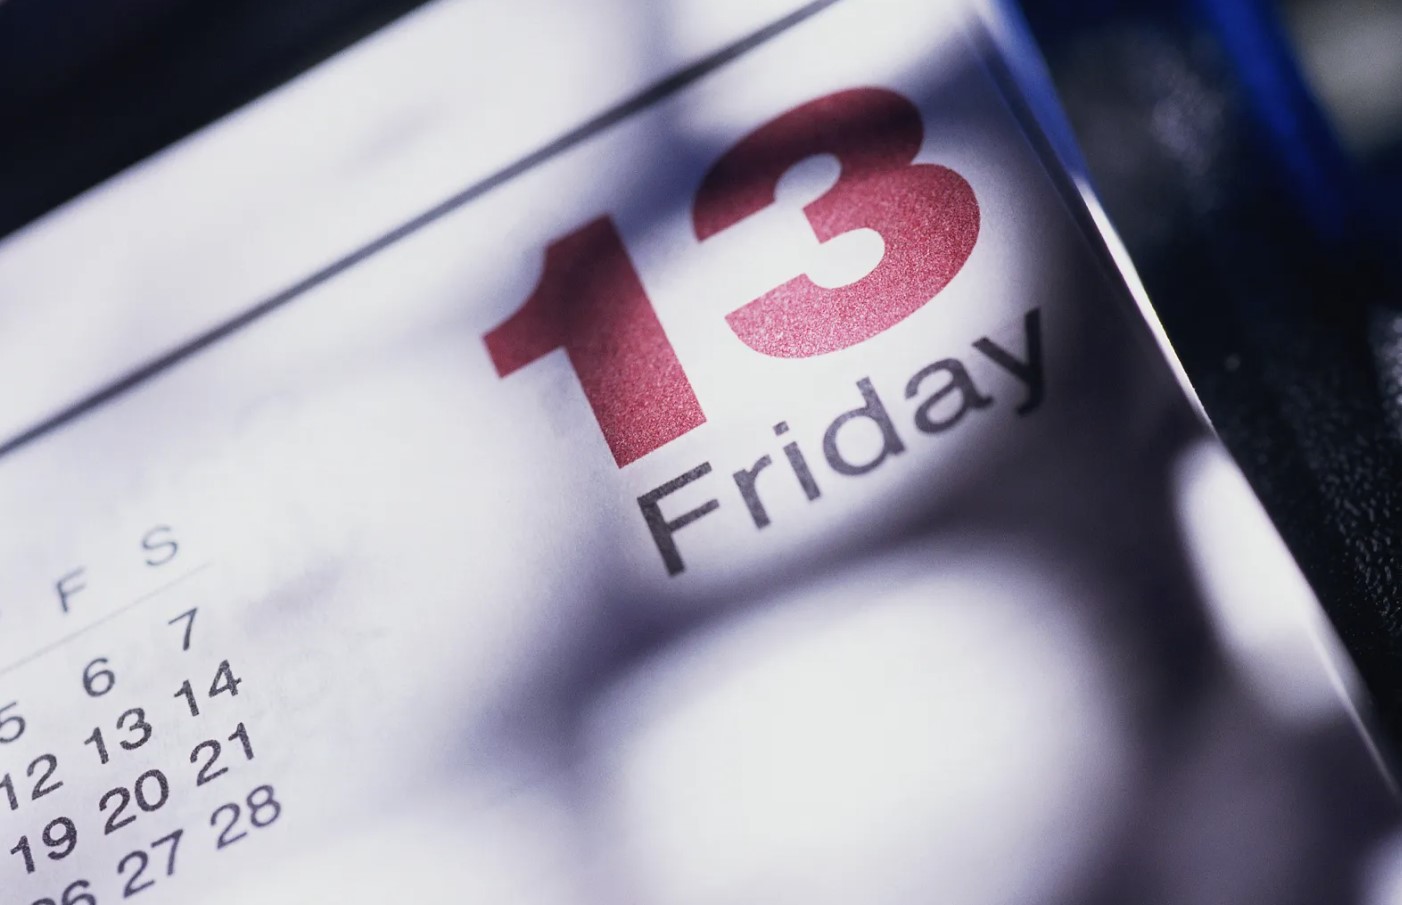 The real reason why people believed Friday the 13th is unlucky 1